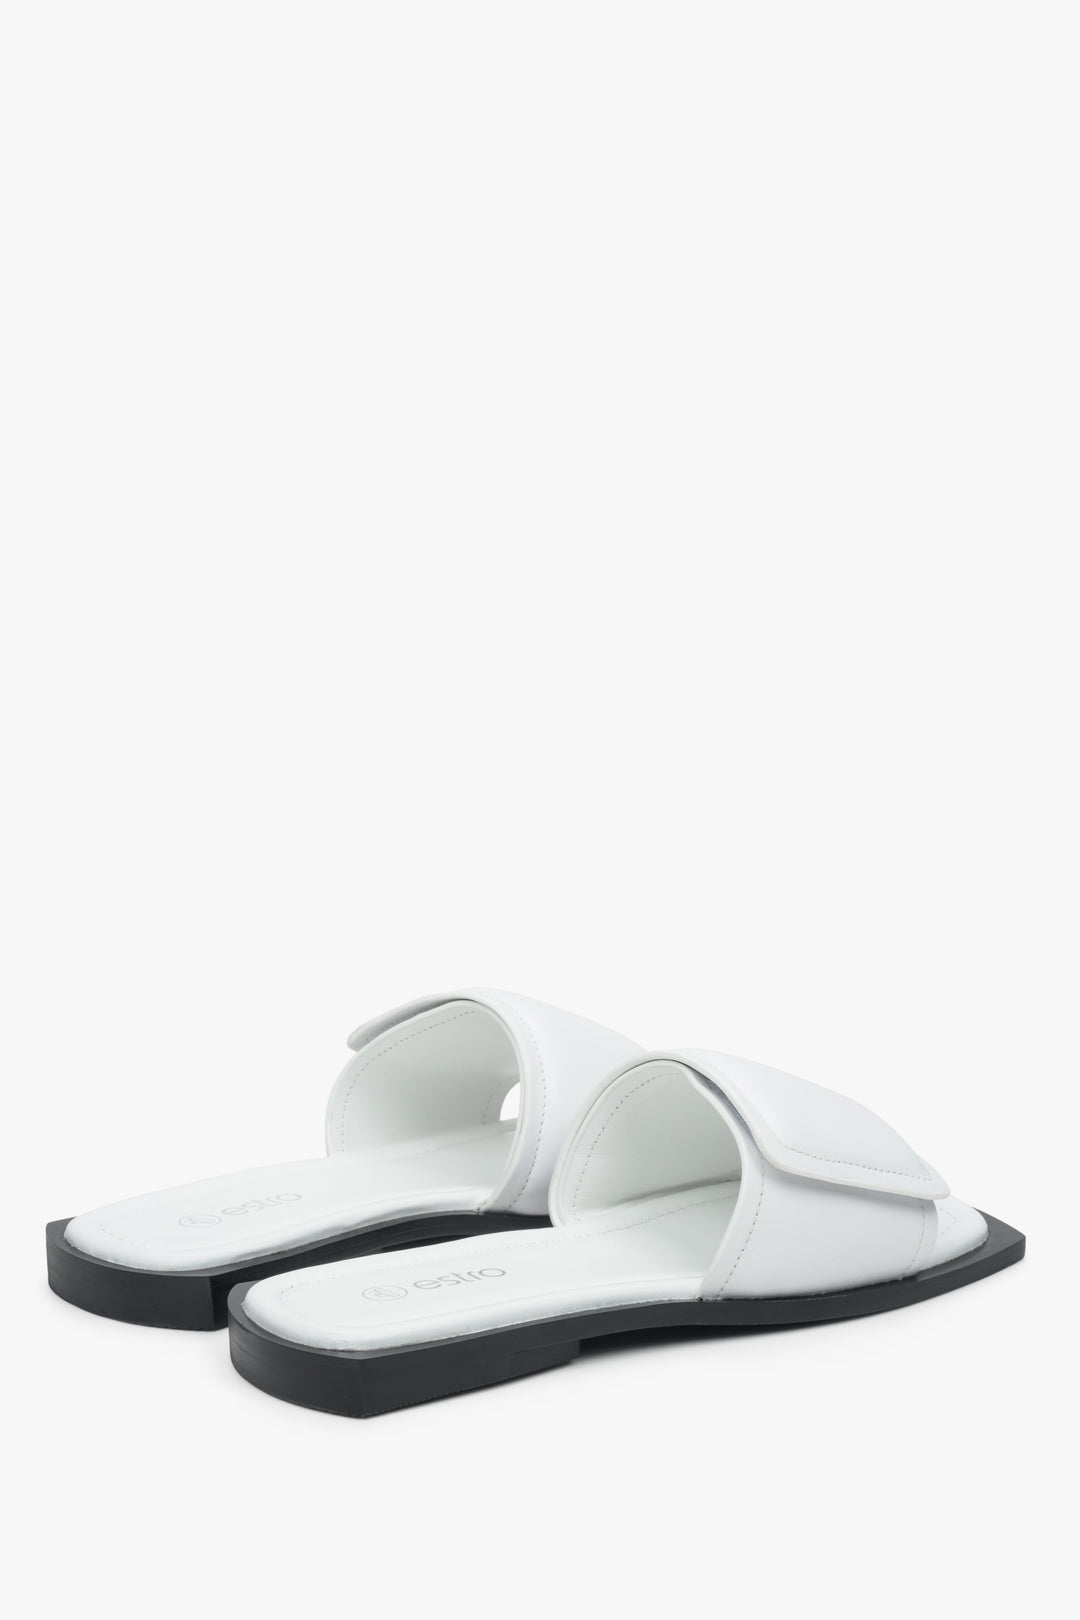 Estro women's slide sandals in white with hook and loop fastening - close-up on shoe sideline.